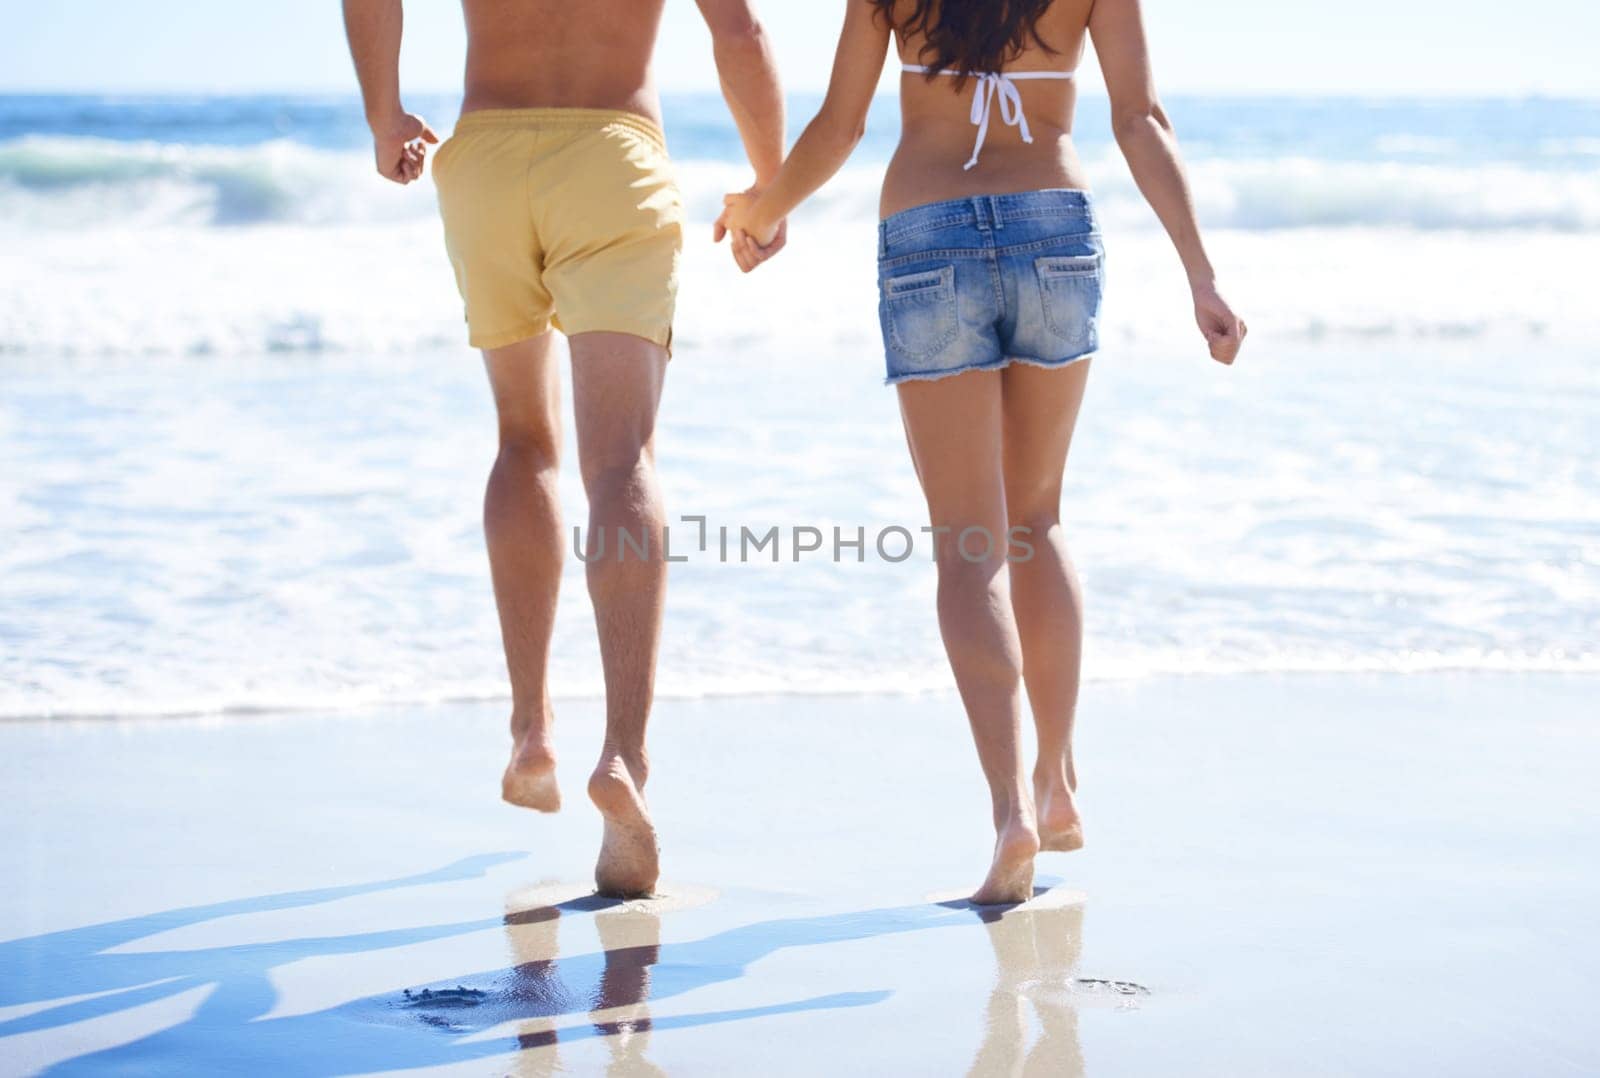 Holding hands, running and couple on beach for holiday adventure together on tropical island with waves. Love, man and woman on ocean vacation with waves, romance and support on travel in Indonesia